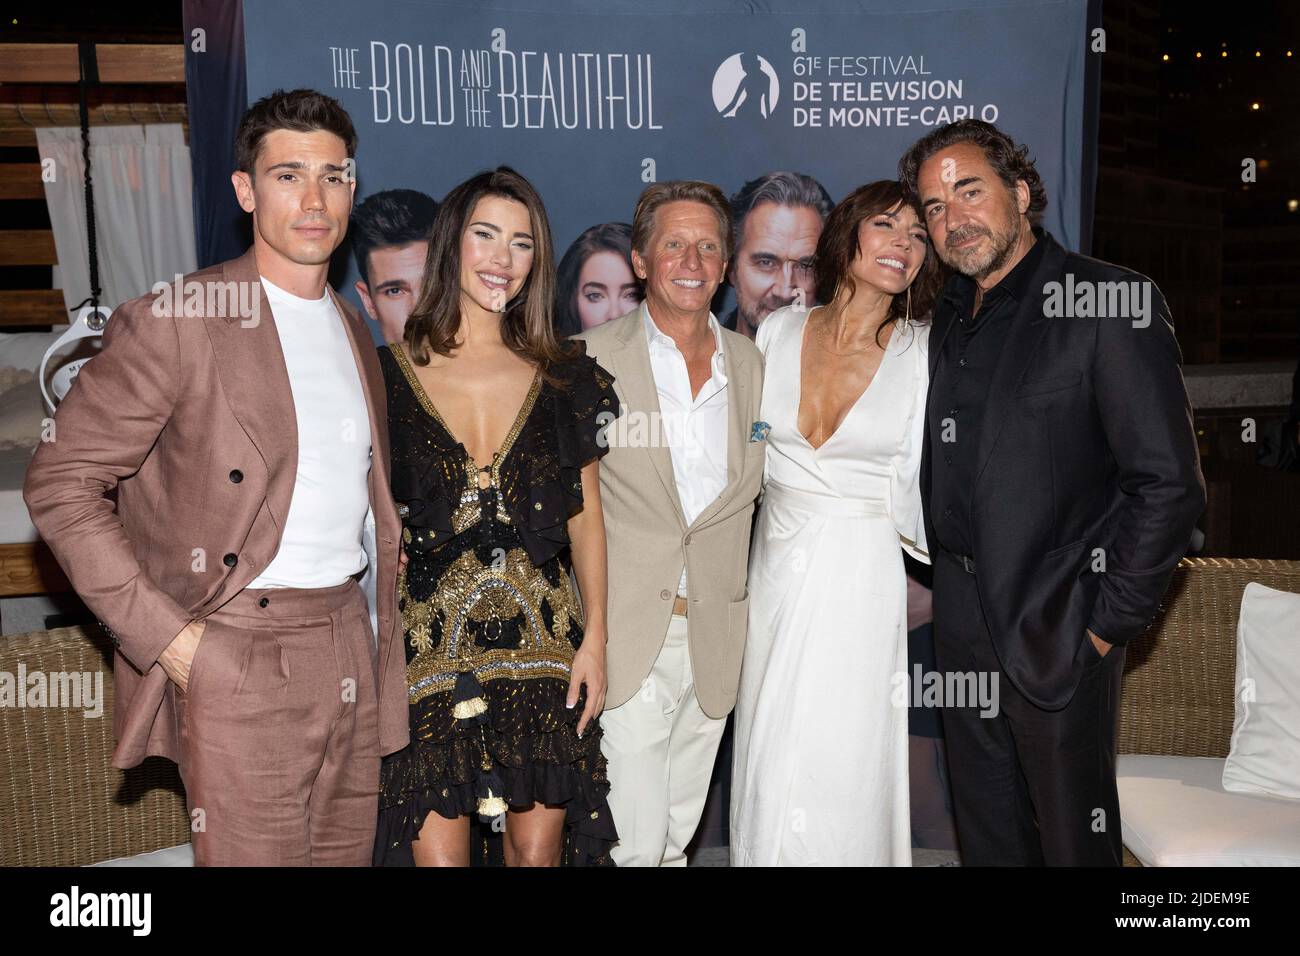 Monte-Carlo, Monaco, June 19, 2022.‘The Bold and the Beautiful’ cast members Tanner Novlan, Jacqueline Macinnes Wood, Thorsten Kaye, Krista Allen attend the 35th anniversary of the TV series during the 61st Television Festival of Monte-Carlo ‘Nominees Party’ at the Fairmont hotel, in Monte-Carlo, Monaco, on June 19, 2022. Photo Pool FTV/ABACAPRESS.COM Stock Photo